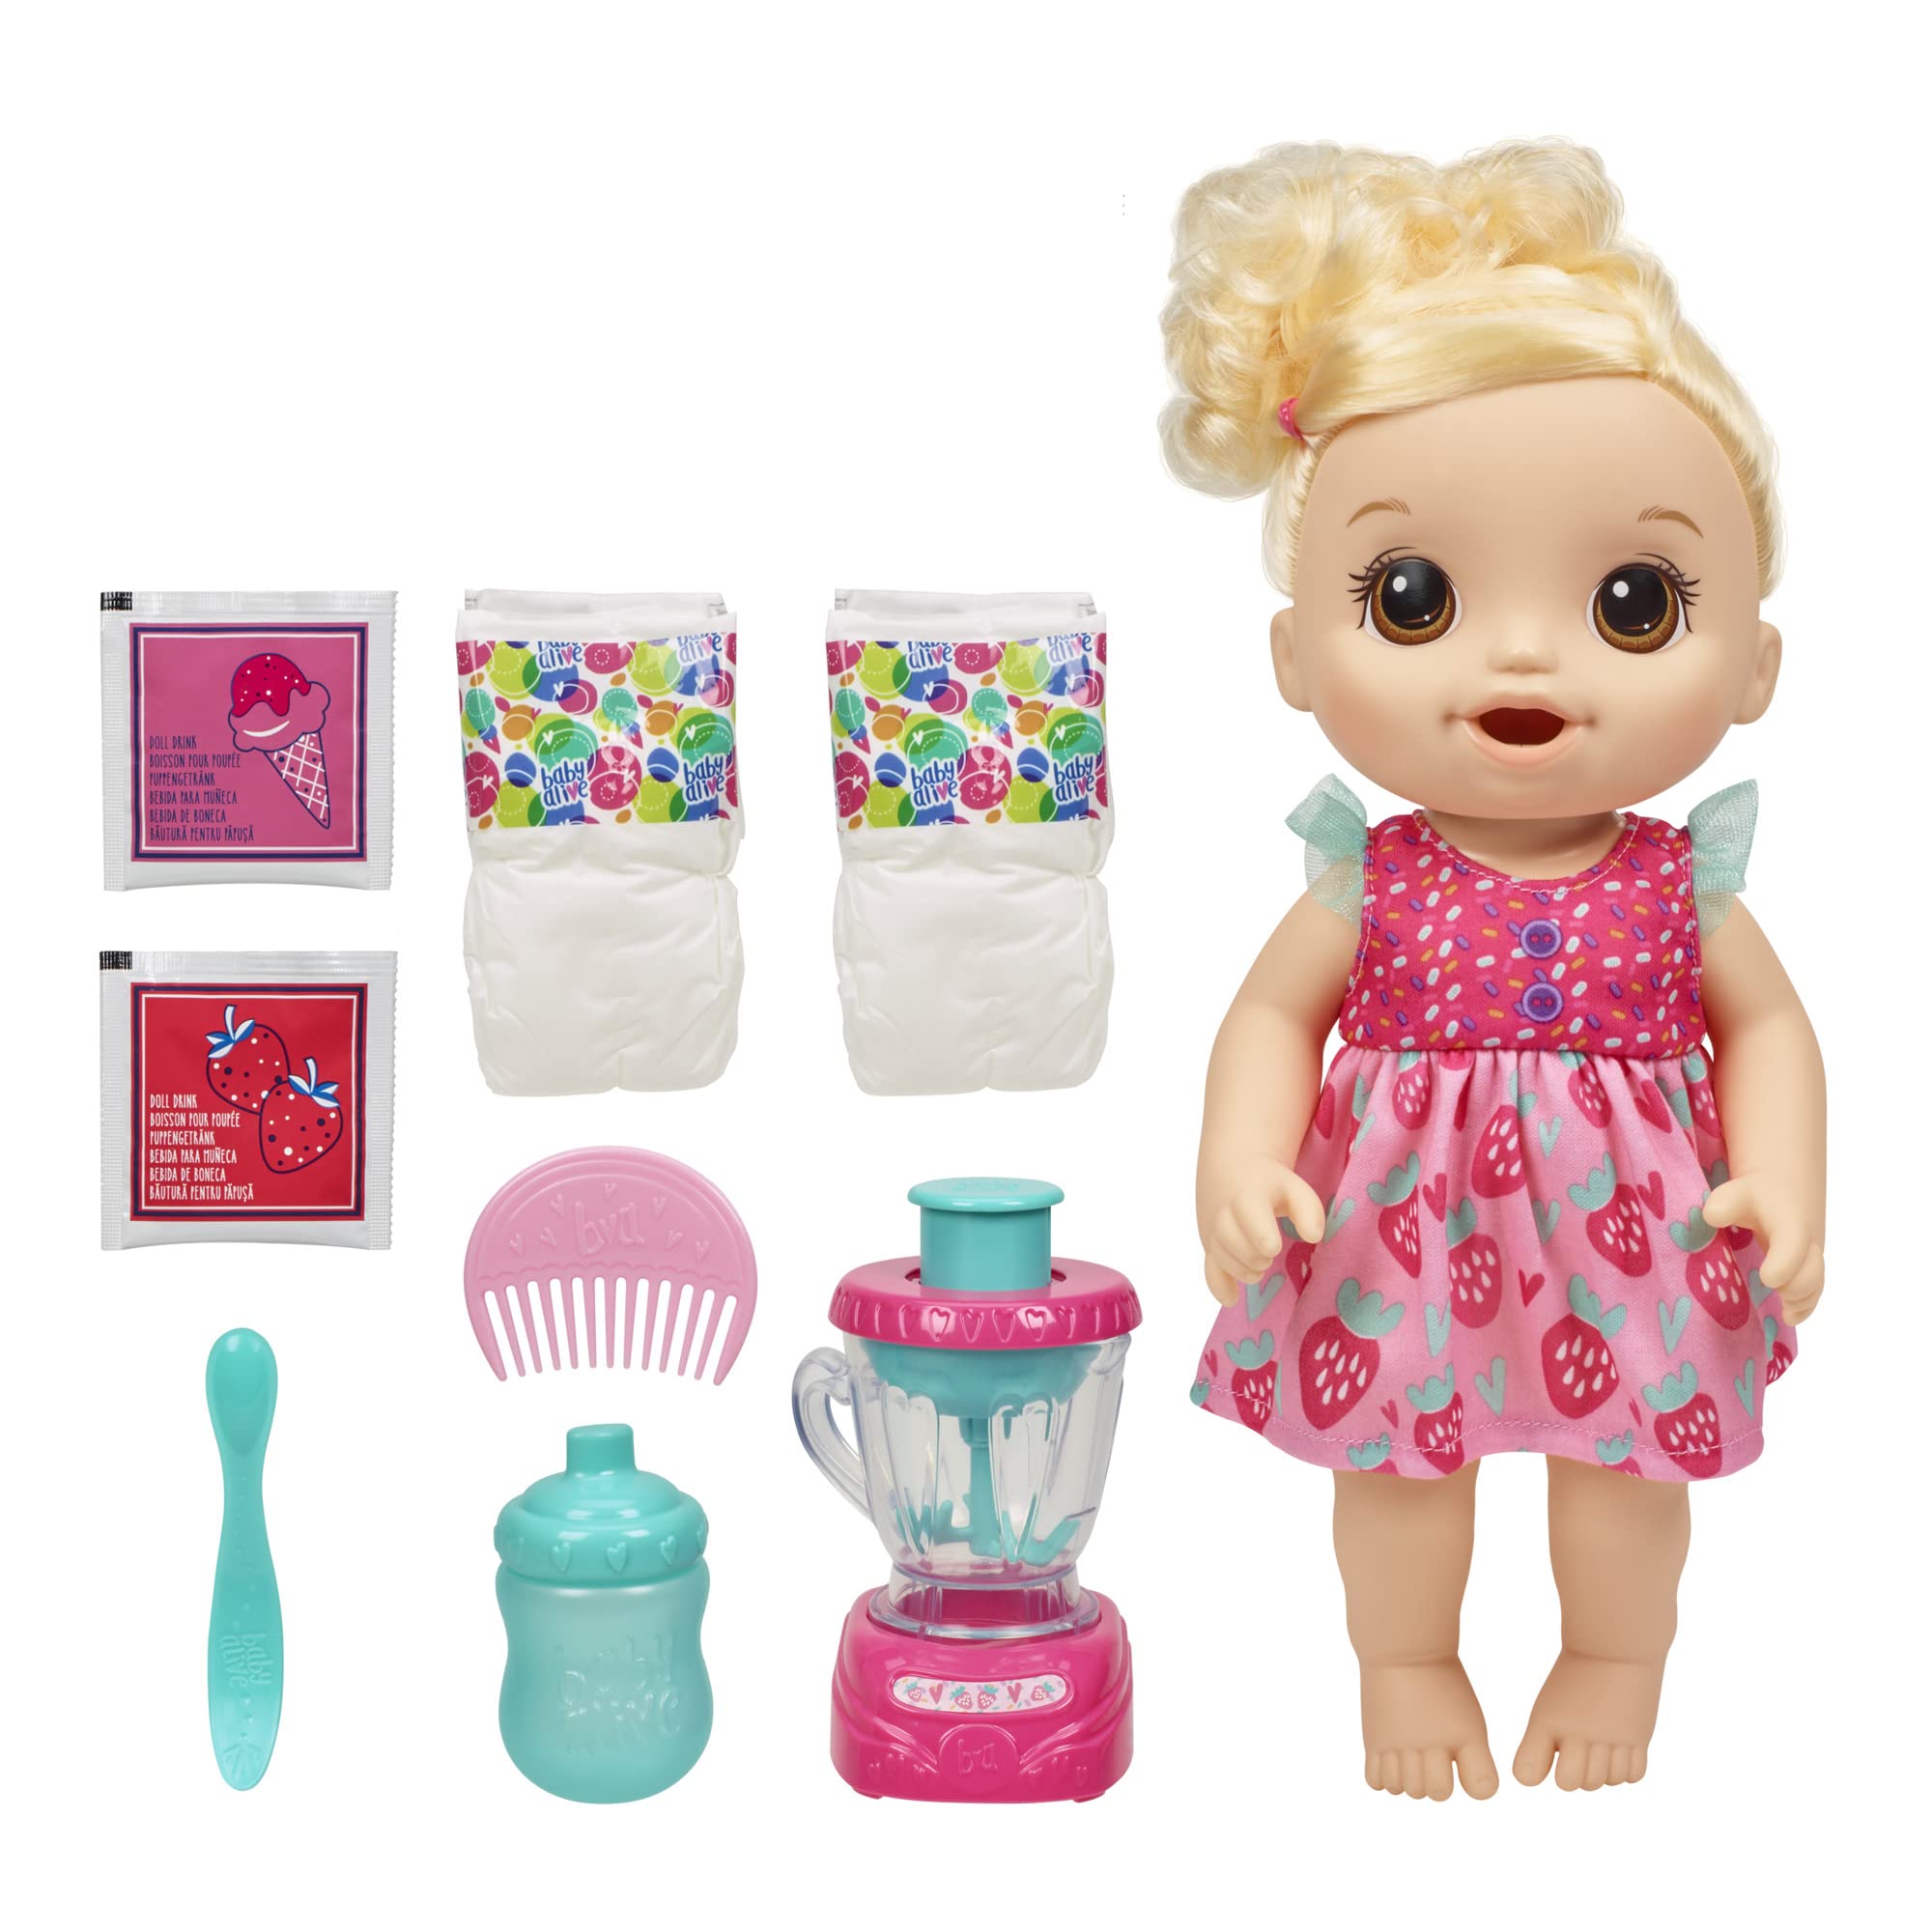 Baby Alive Magical Mixer Baby Doll, Strawberry Shake, Baby Alive Doll With Toy Blender, Baby Doll Set For Kids 3 And Up, Blonde